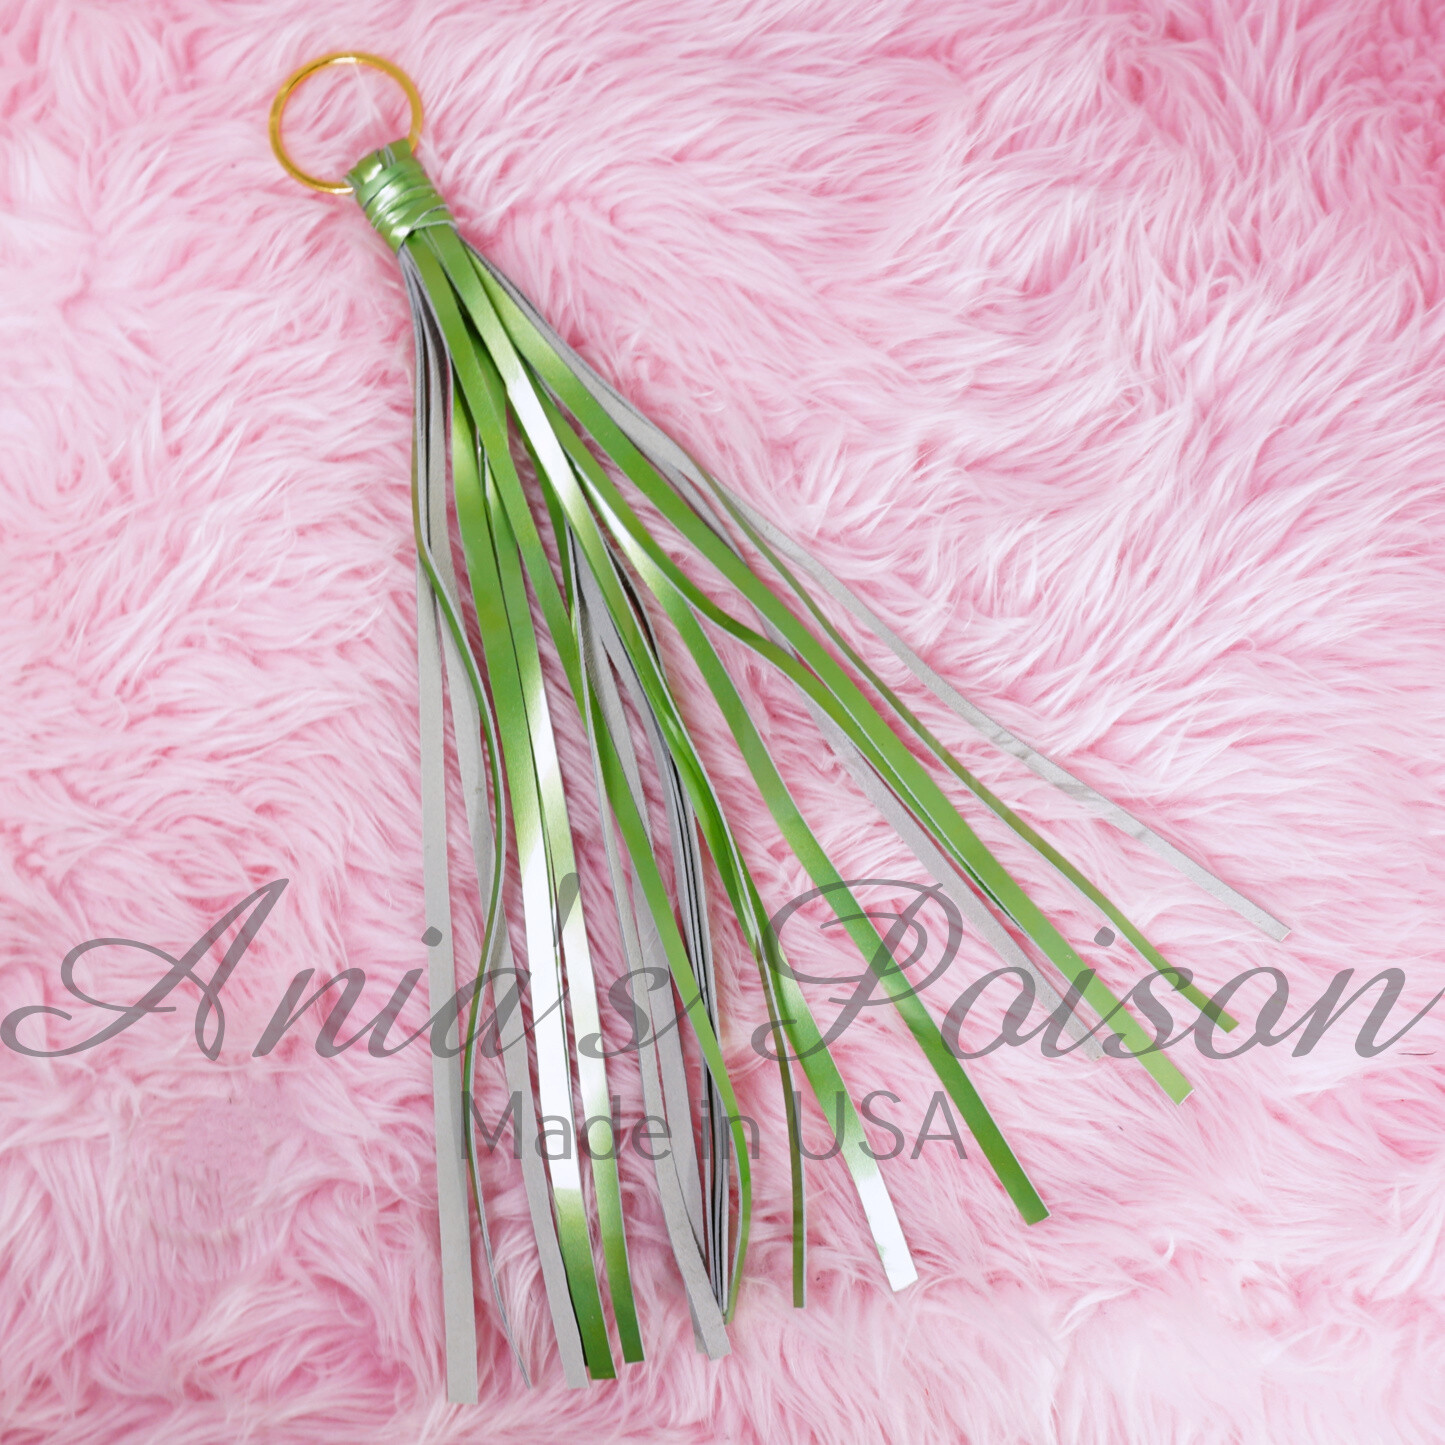 Green Small Leather Gold Flogger whip Toy / fun gift